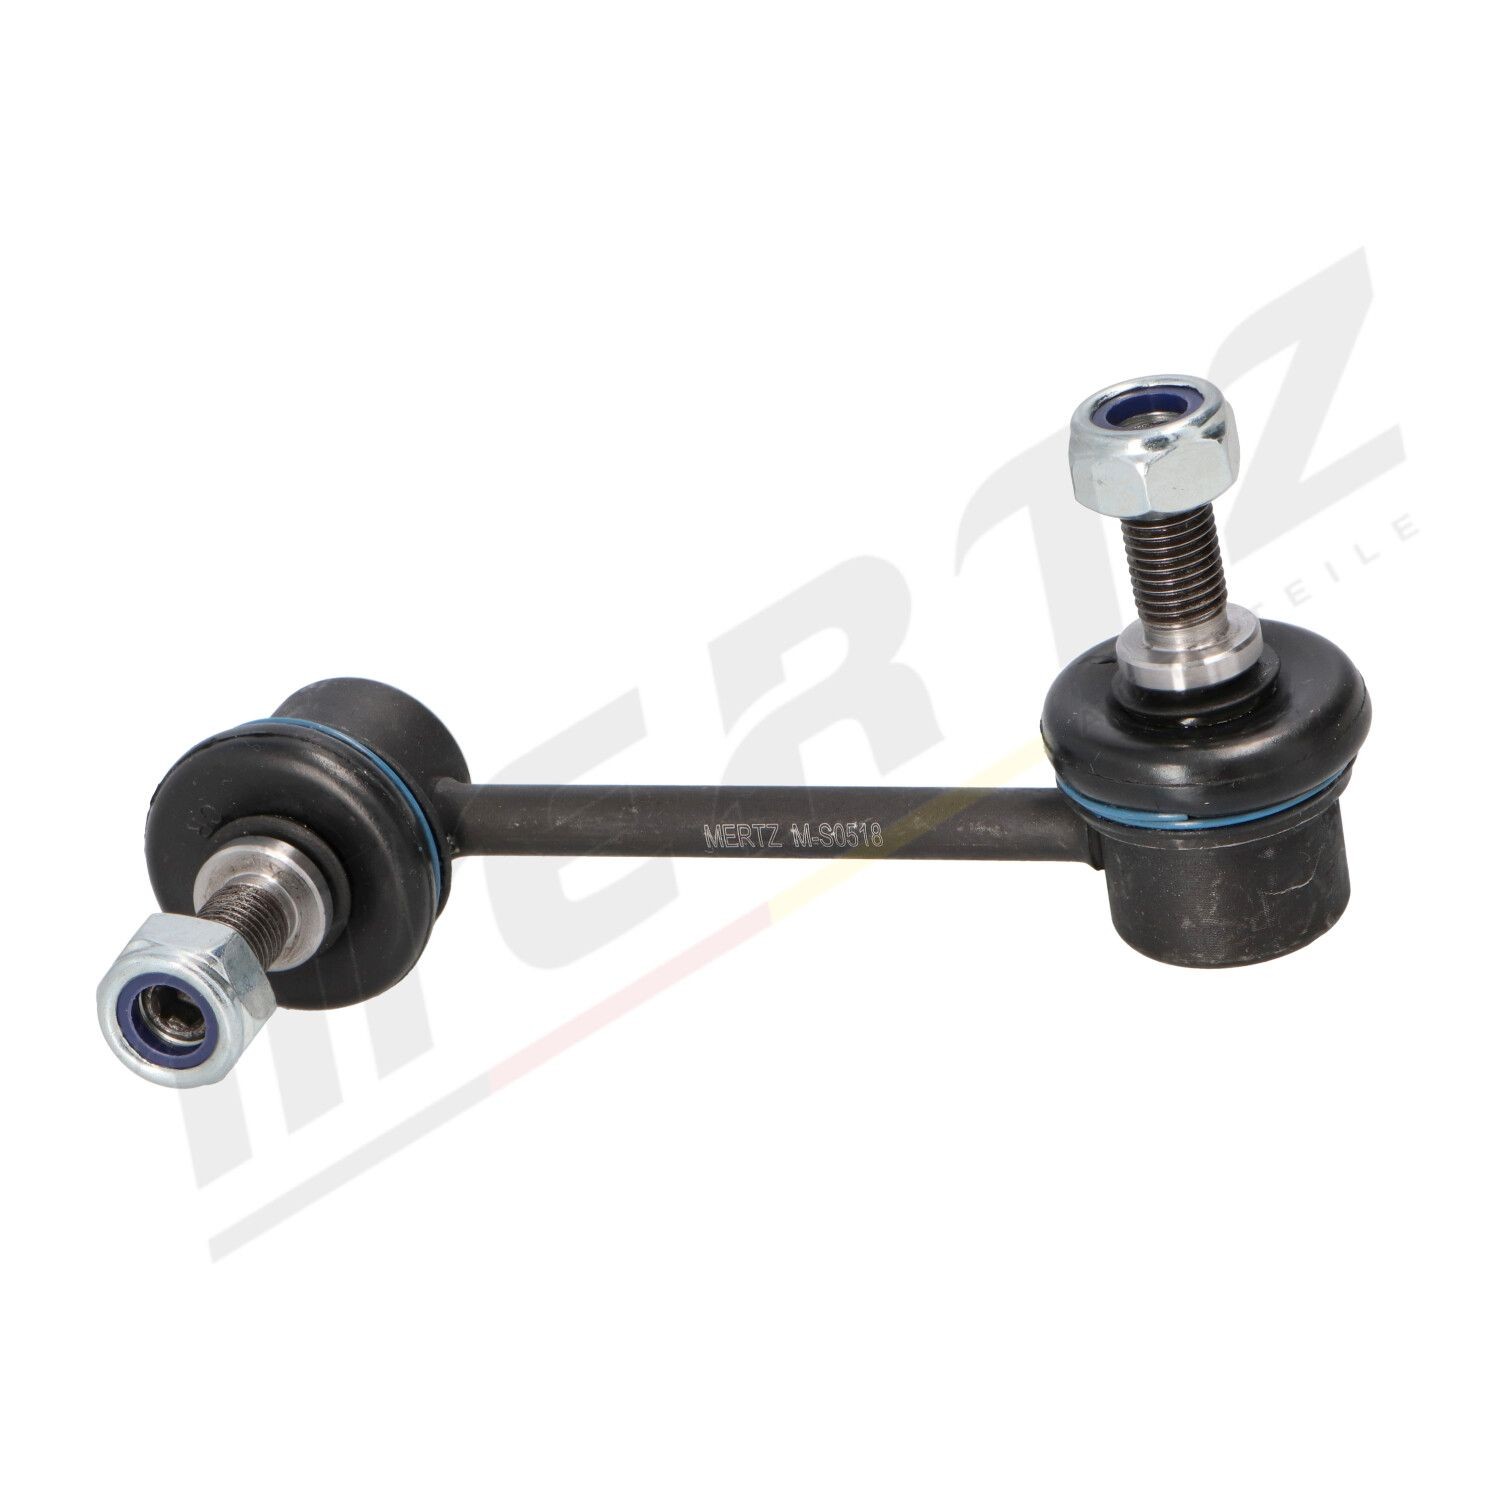 Anti-roll bar link MERTZ M-S0518 - Ford USA Probe I Suspension system spare parts order